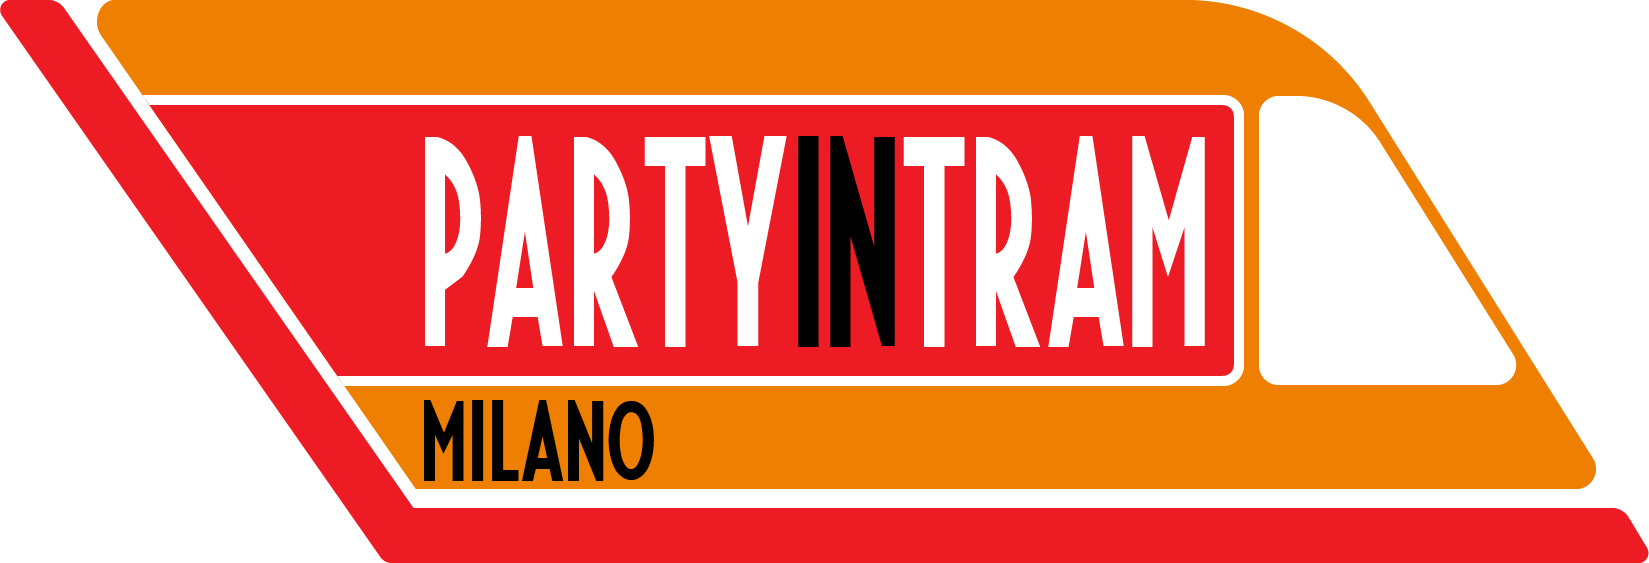 Party In Tram Milano 